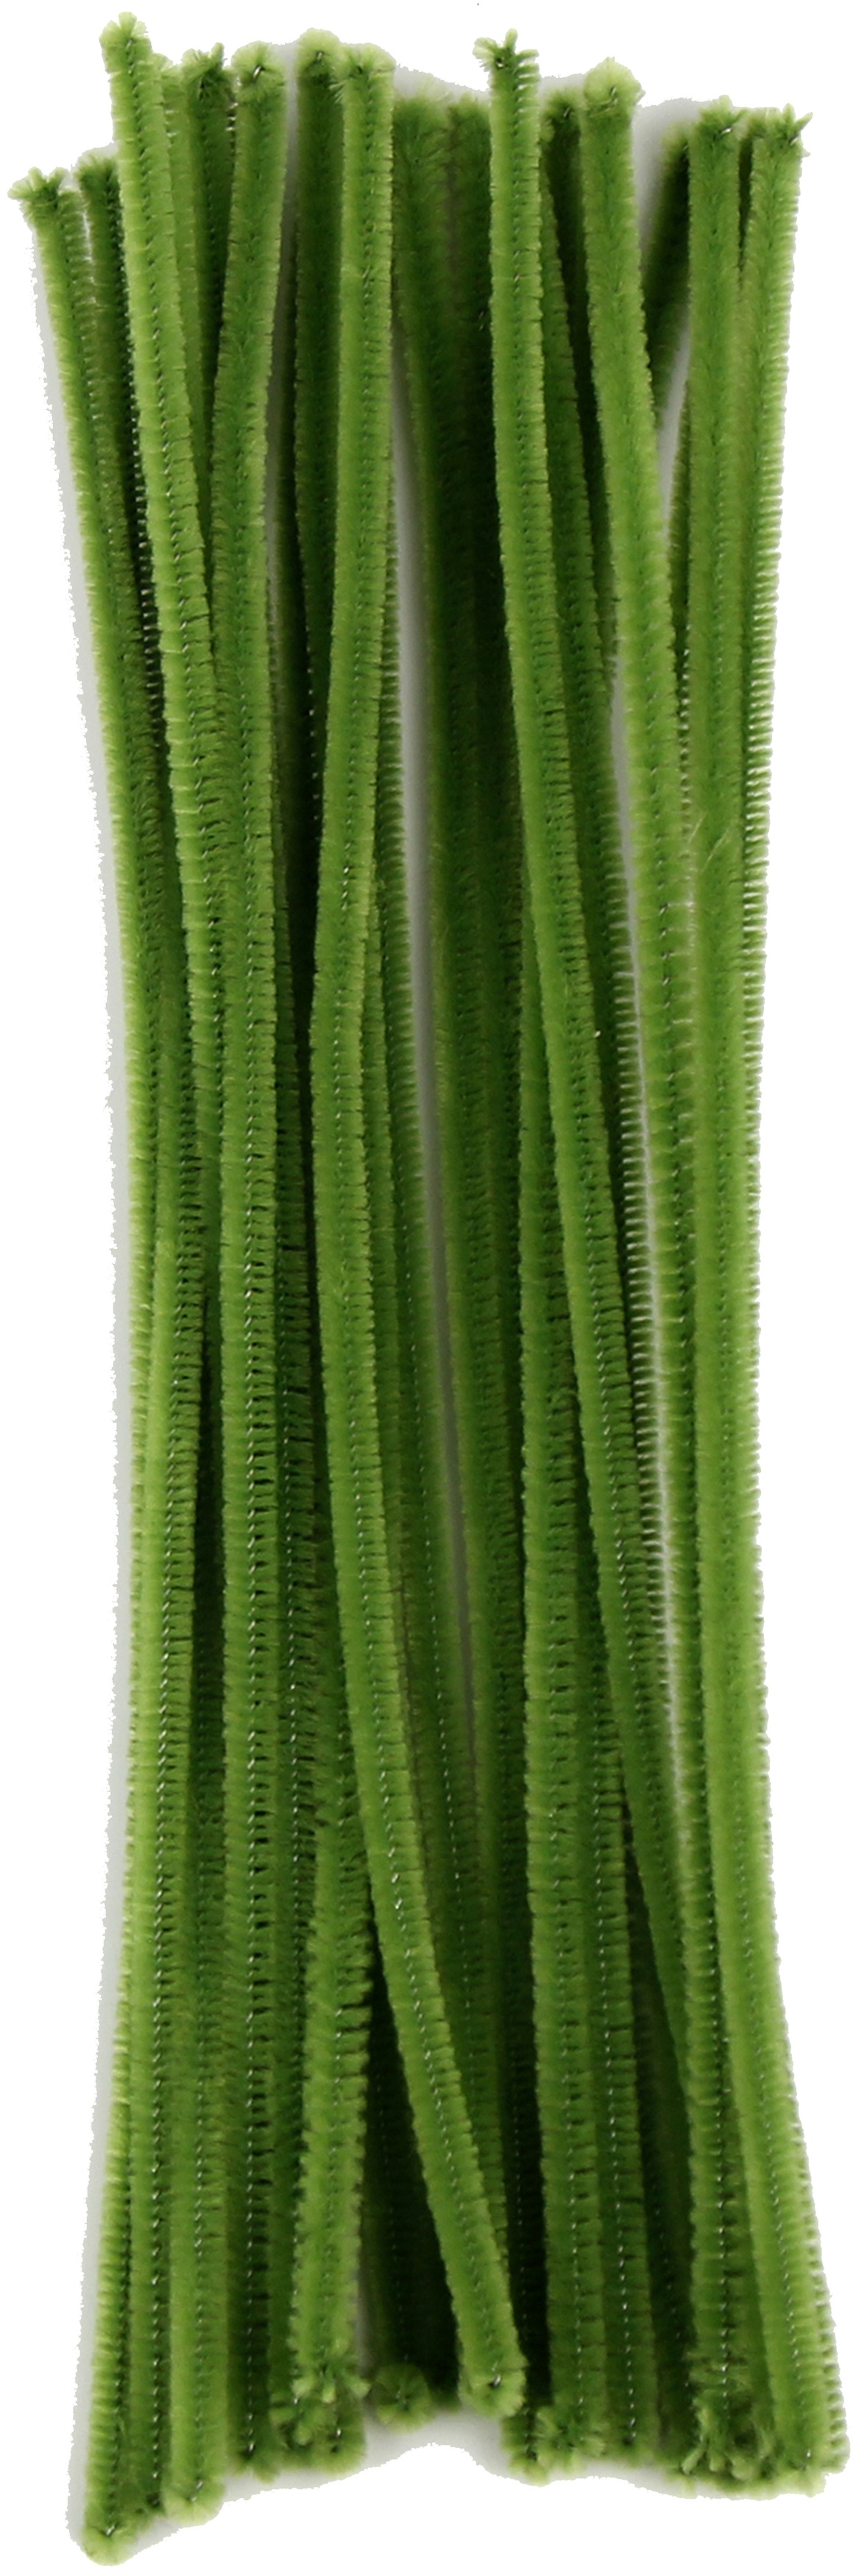 Touch of Nature Moss Green Chenille Stem, 25pcs - Pipe Cleaner - Craft  Basic - Kid Craft - Fuzzy Wire - Bendable Wire Craft - DIY